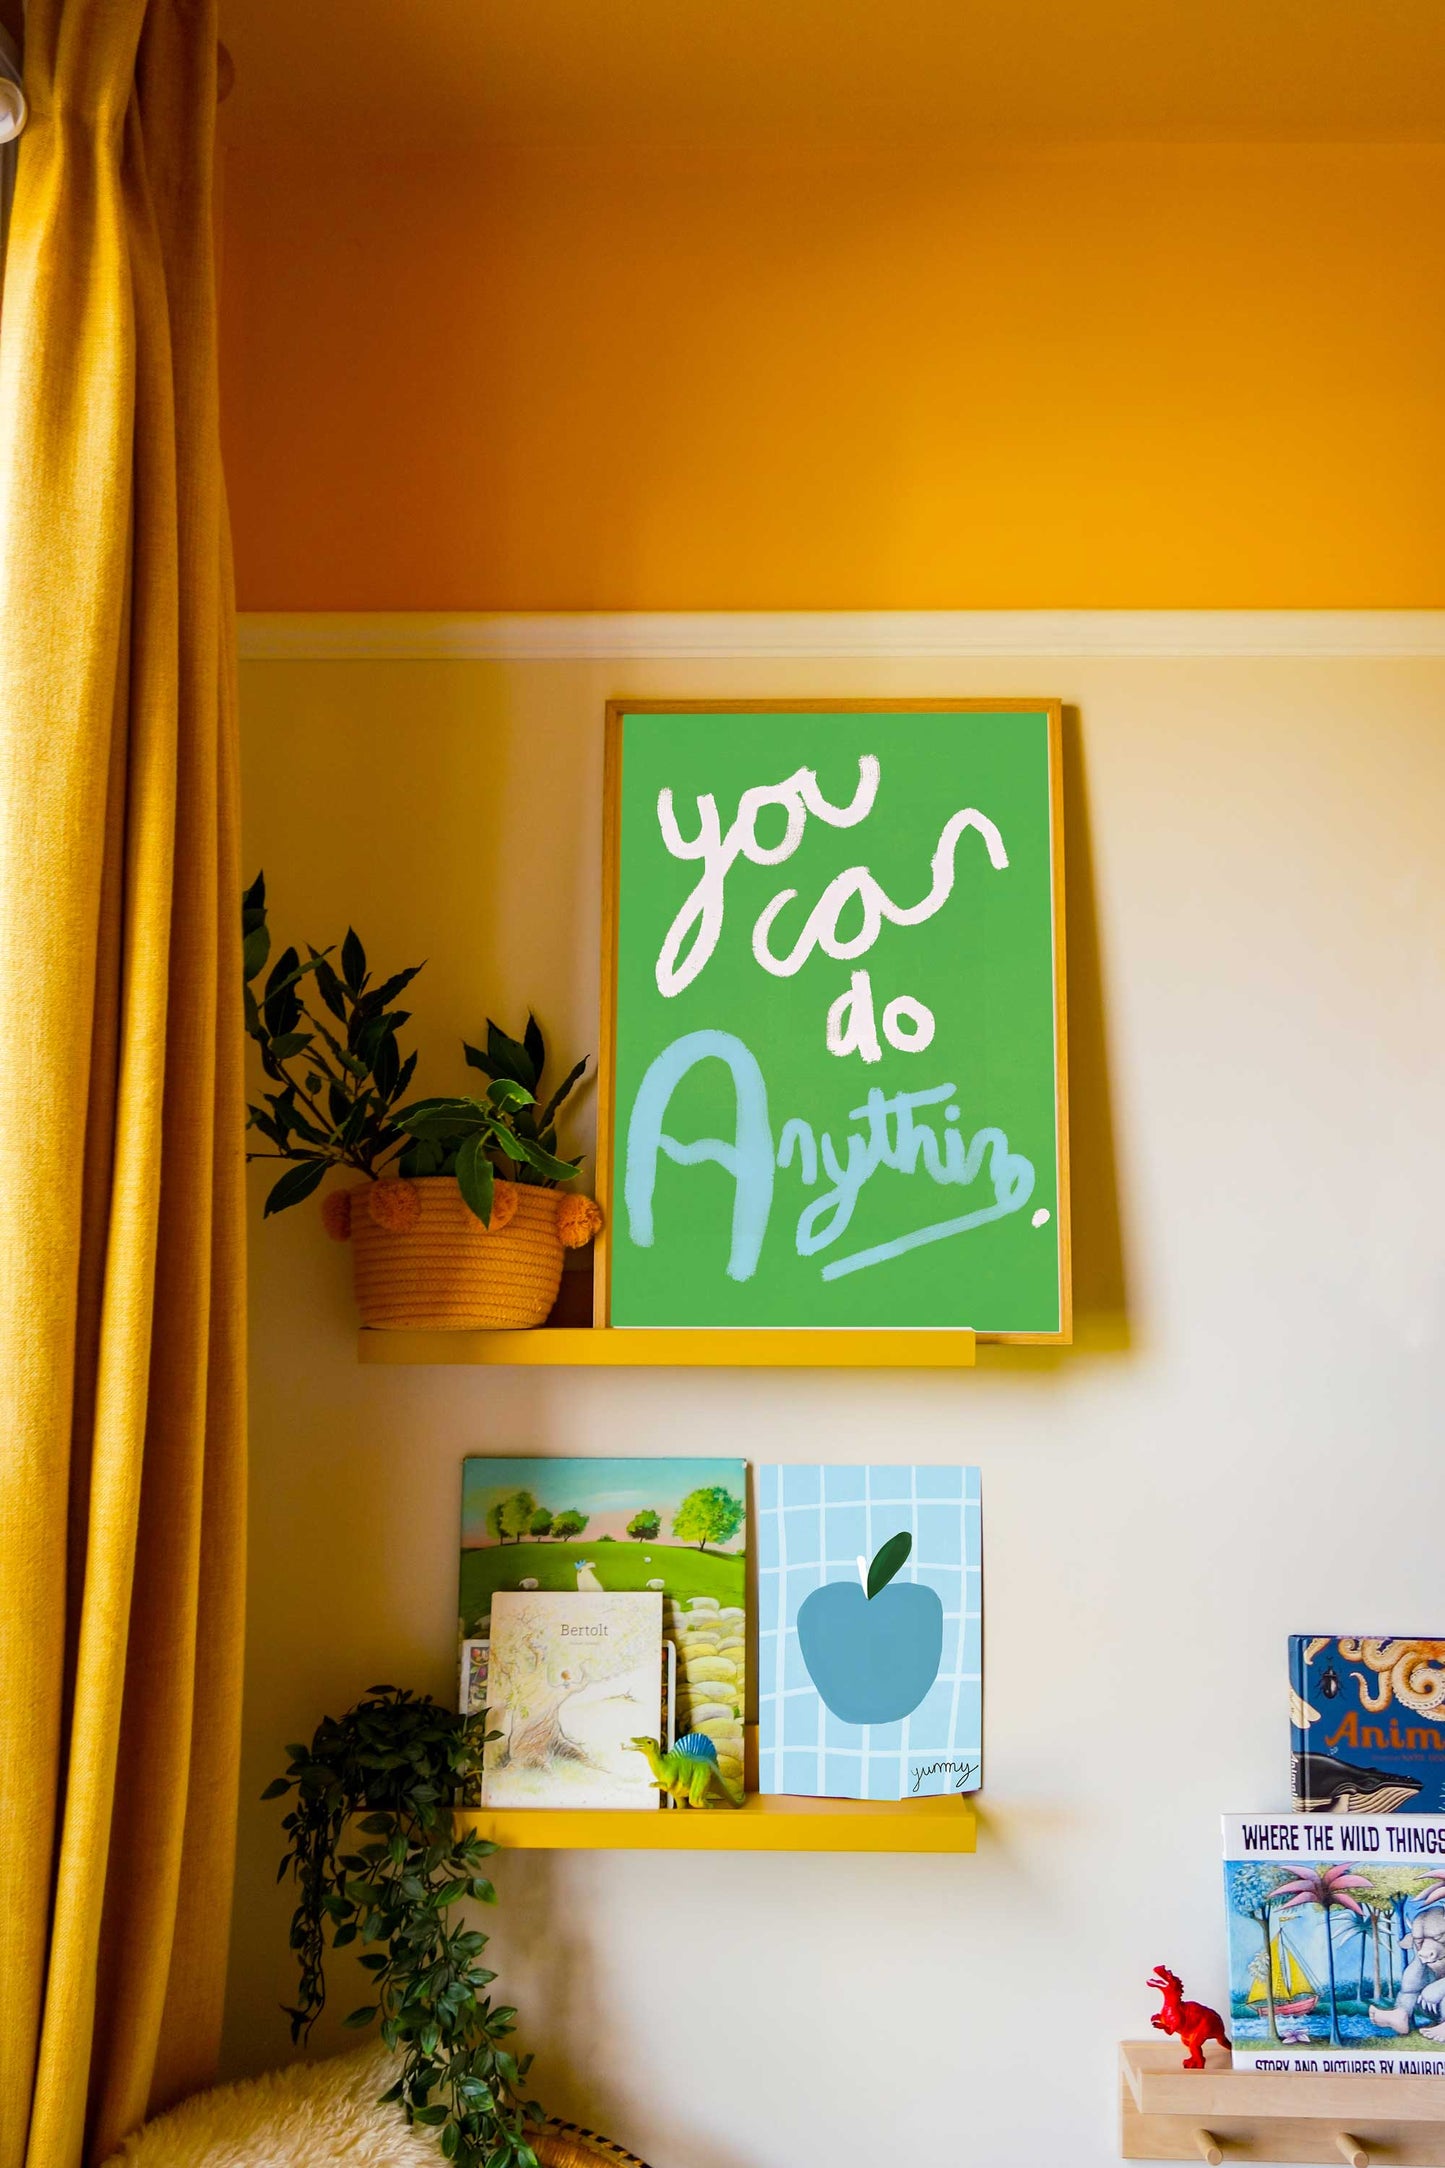 You Can Do Anything Print - Green, White, Blue Framed Print